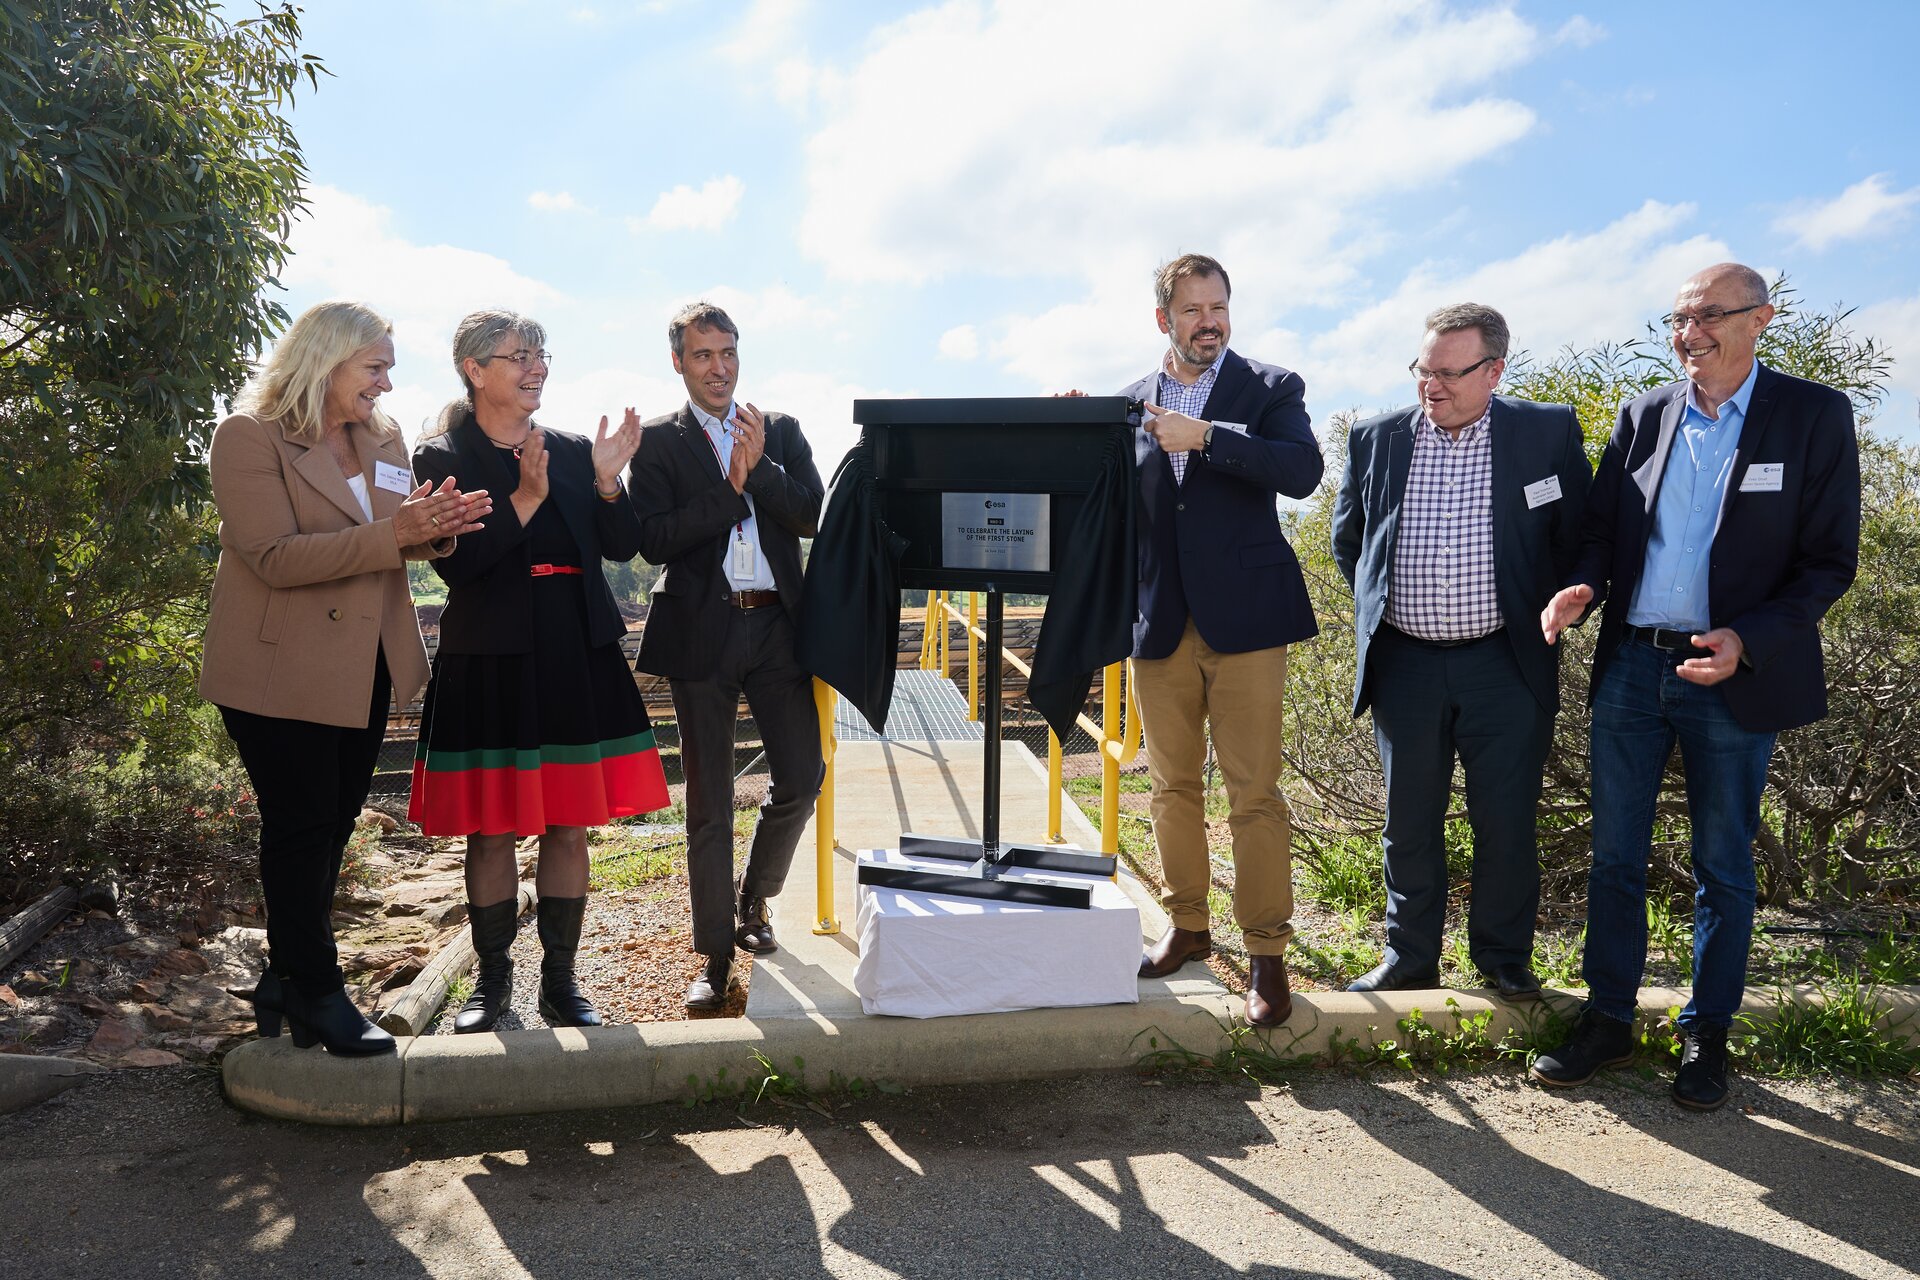 Plaque unveiling to mark start of construction on new ESA deep-space antenna in Australia